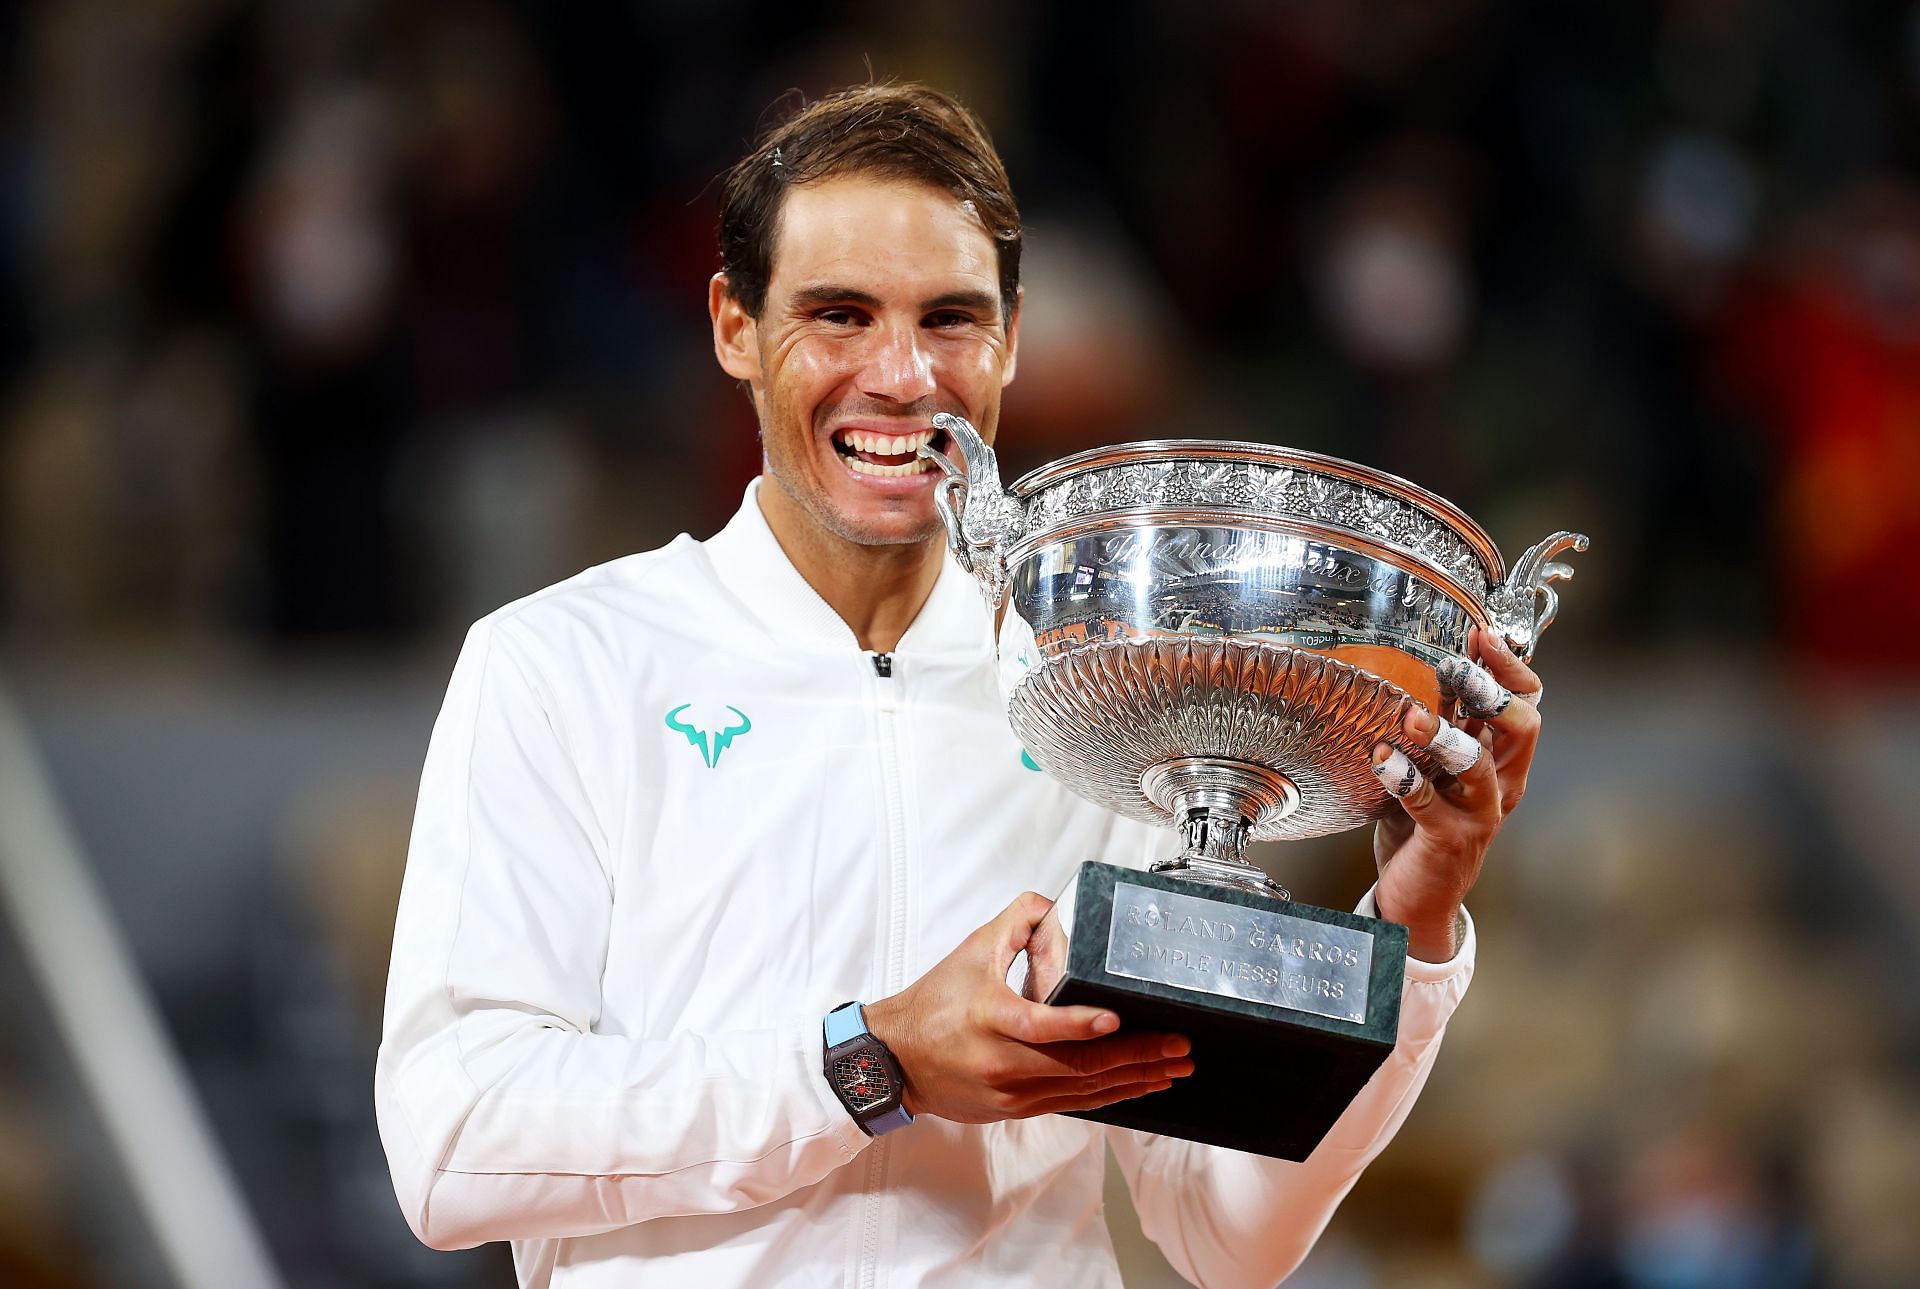 Rafael Nadal with the 2020 French Open trophy